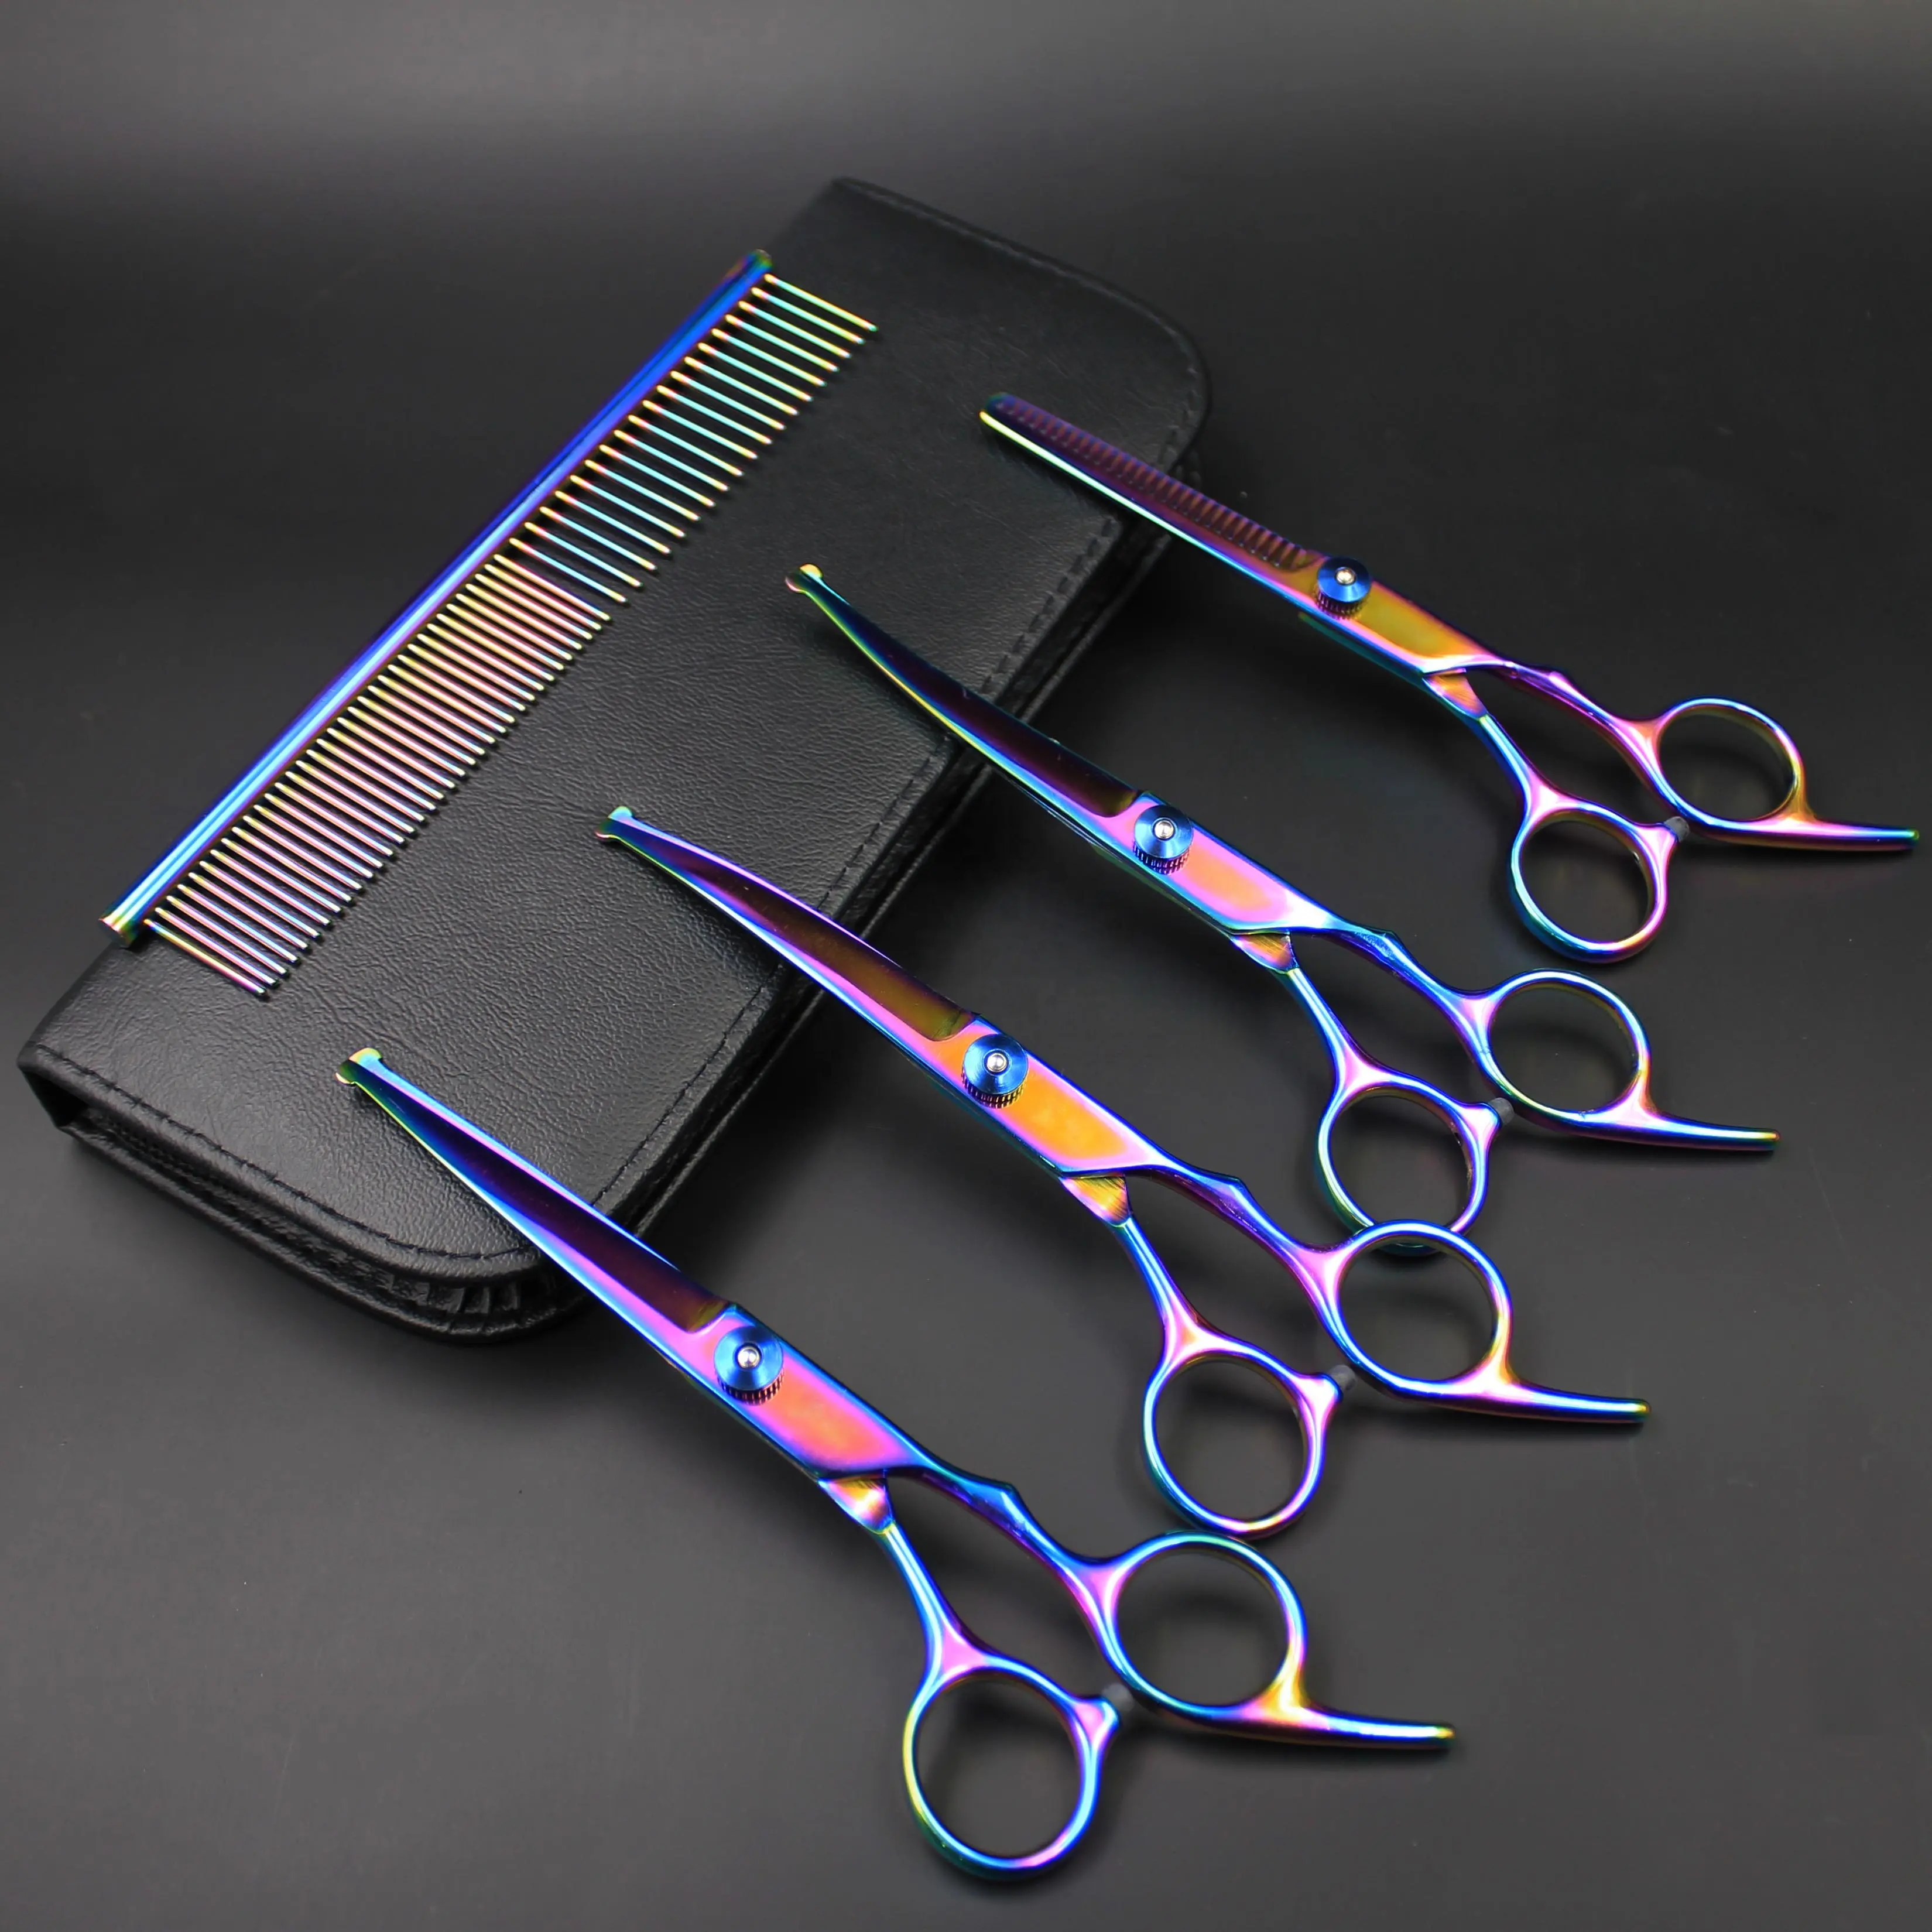 6 Inch Stainless Steel Hair Scissors Set Professional Cutting Shears